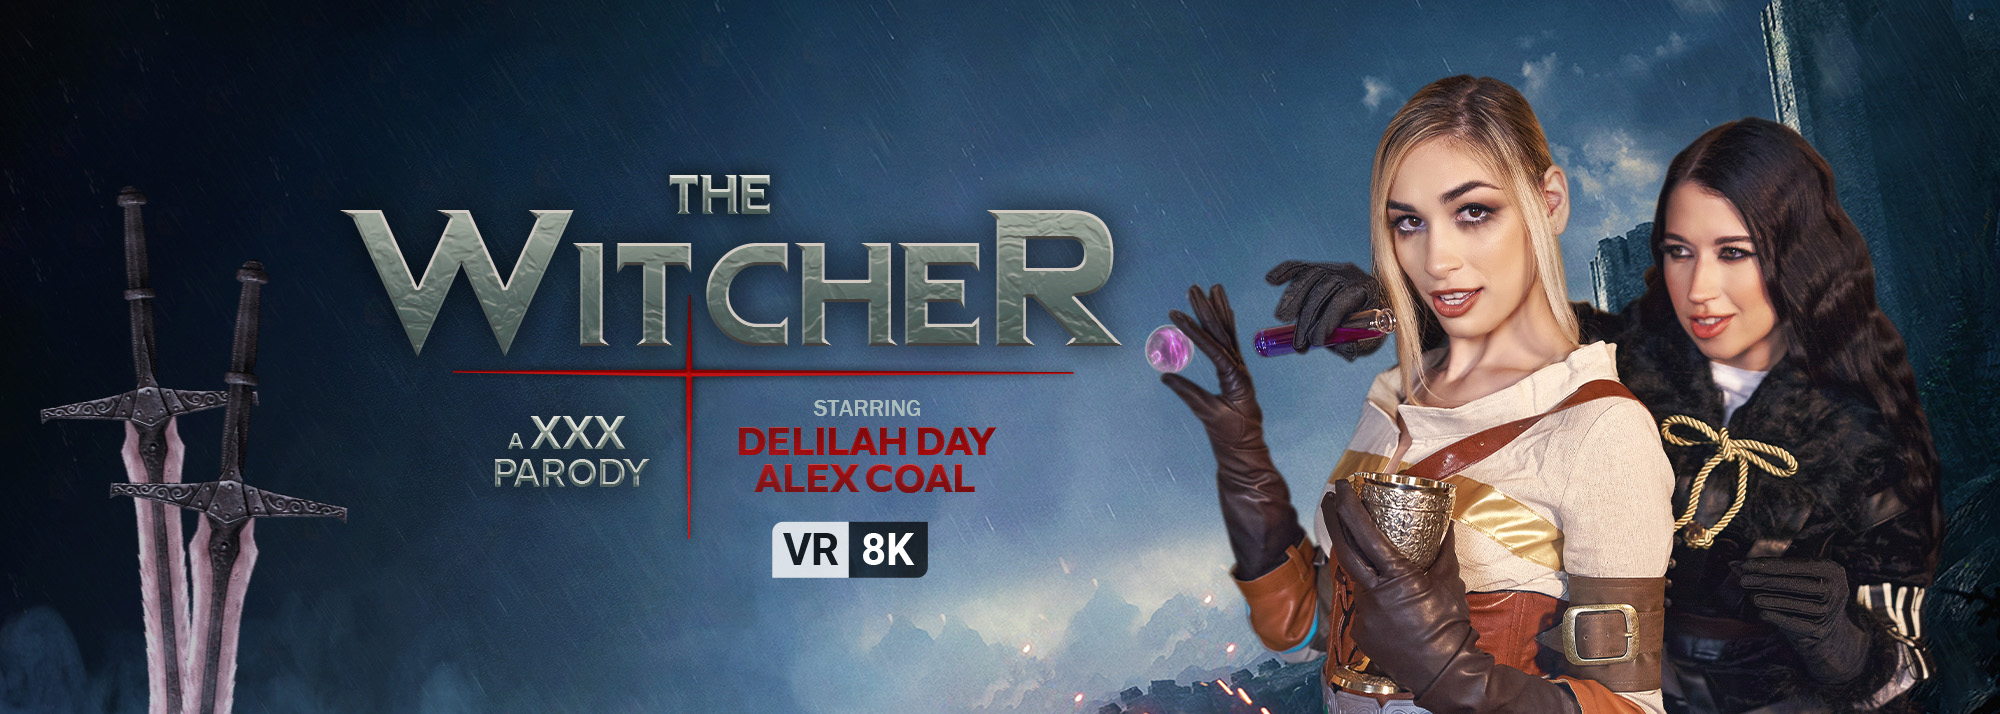 The Witcher (A XXX Parody) - VR Porn Video, Starring Alex Coal VR, Delilah Day VR